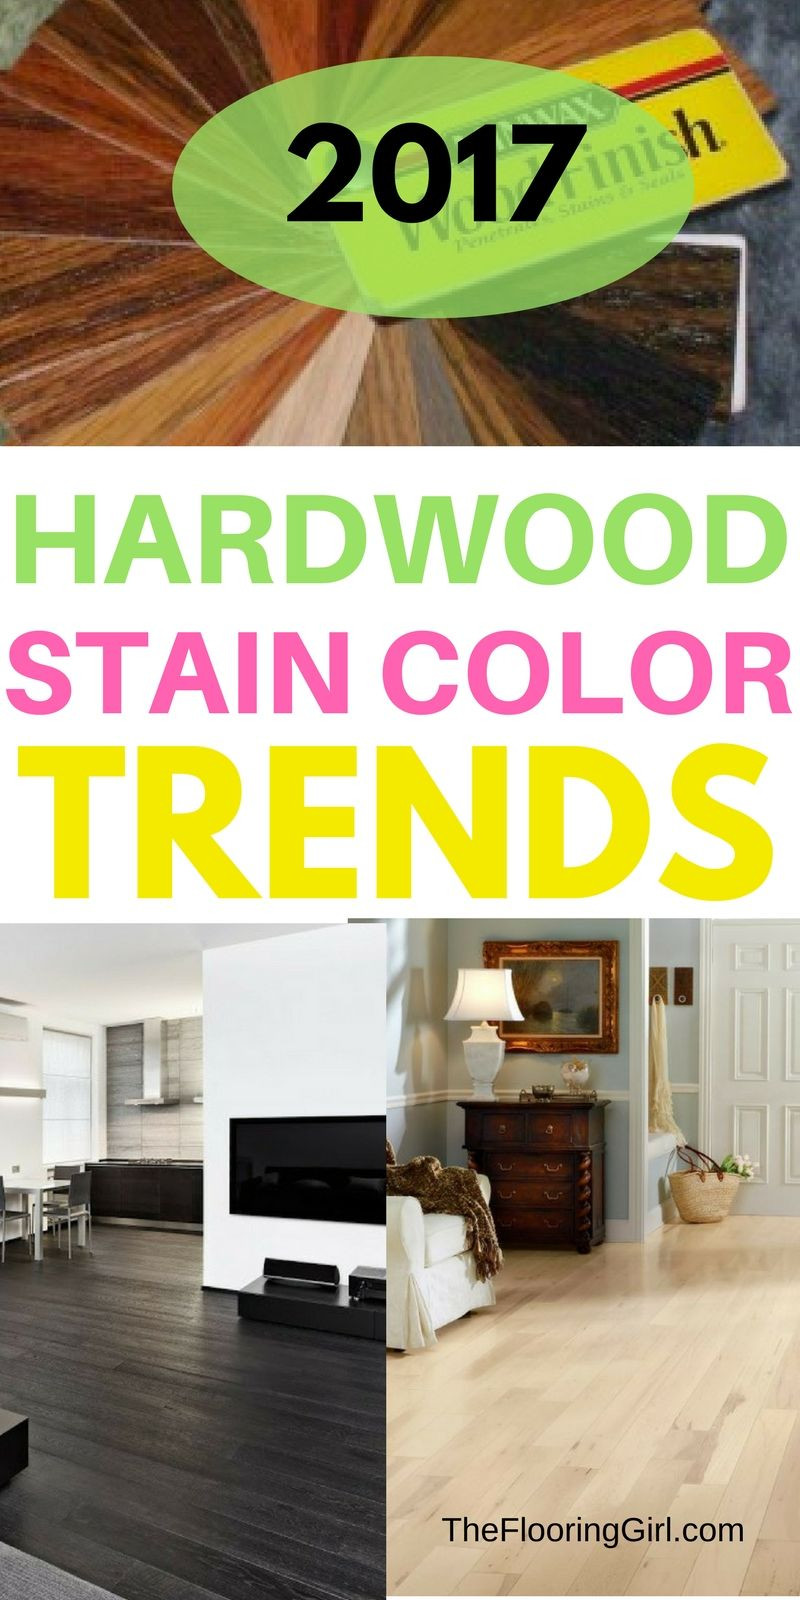 24 Awesome Pictures Of Dark Hardwood Floors In Homes 2024 free download pictures of dark hardwood floors in homes of hardwood flooring stain color trends 2018 more from the flooring within hardwood flooring stain color trends for 2017 hardwood colors that are in